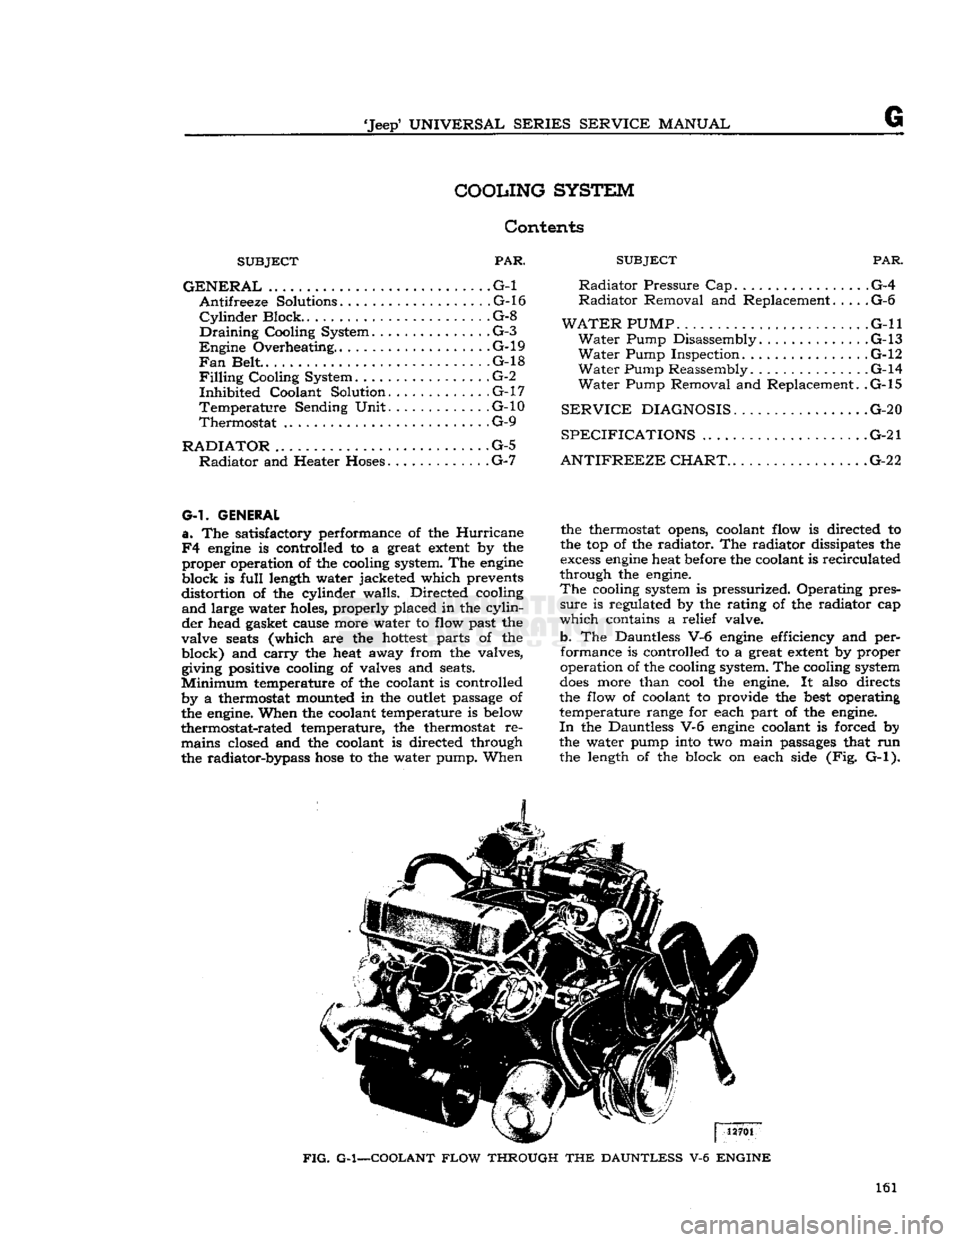 JEEP DJ 1953  Service Manual 
Jeep*
 UNIVERSAL
 SERIES
 SERVICE
 MANUAL 

COOLING
 SYSTEM 

Contents 

SUBJECT
 PAR. 

GENERAL
 .G-l  Antifreeze Solutions. .G-l6 
Cylinder
 Block.
 ..................
 .G-8 

Draining
 Cooling Sy